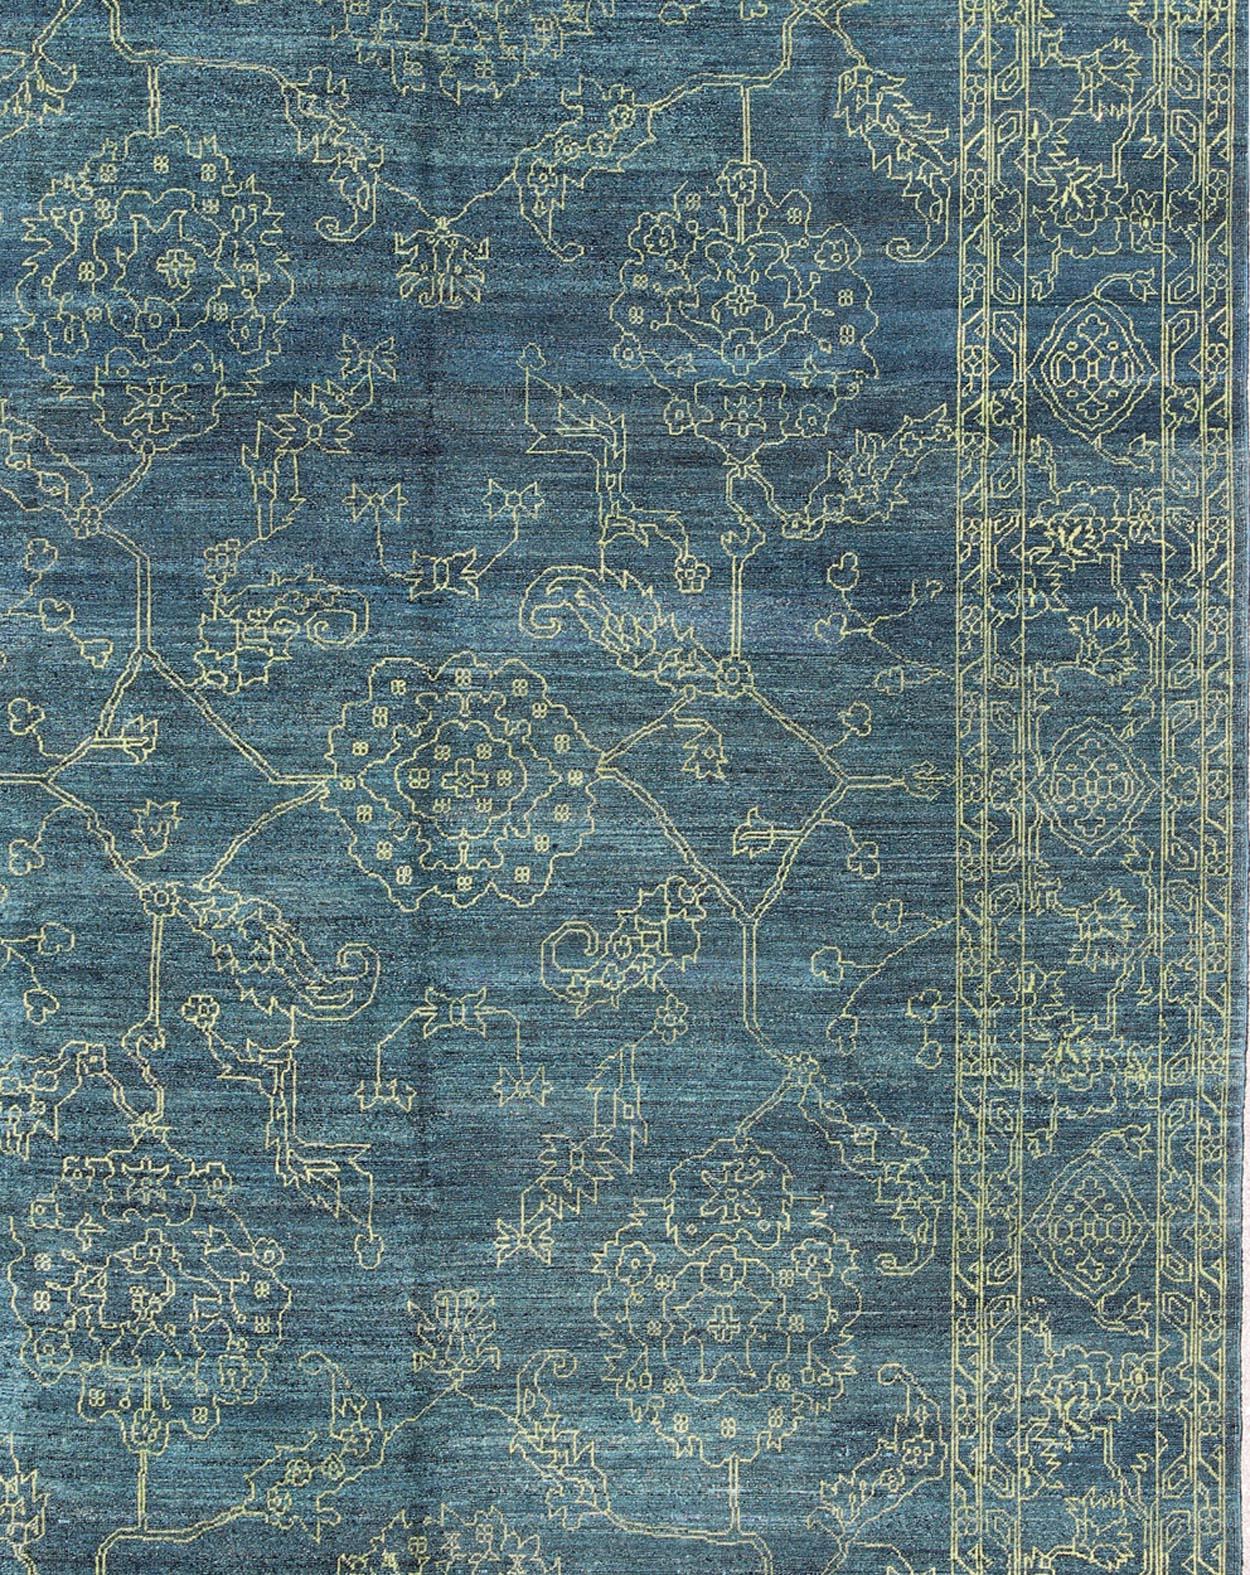 Modern rug with Transitional design, rug AN-118153, country of origin / type: Turkey / Modern, circa Early-21st century.

This finely hand knotted transitional design rug features a beautiful floral design rendered in teal blue and lime green